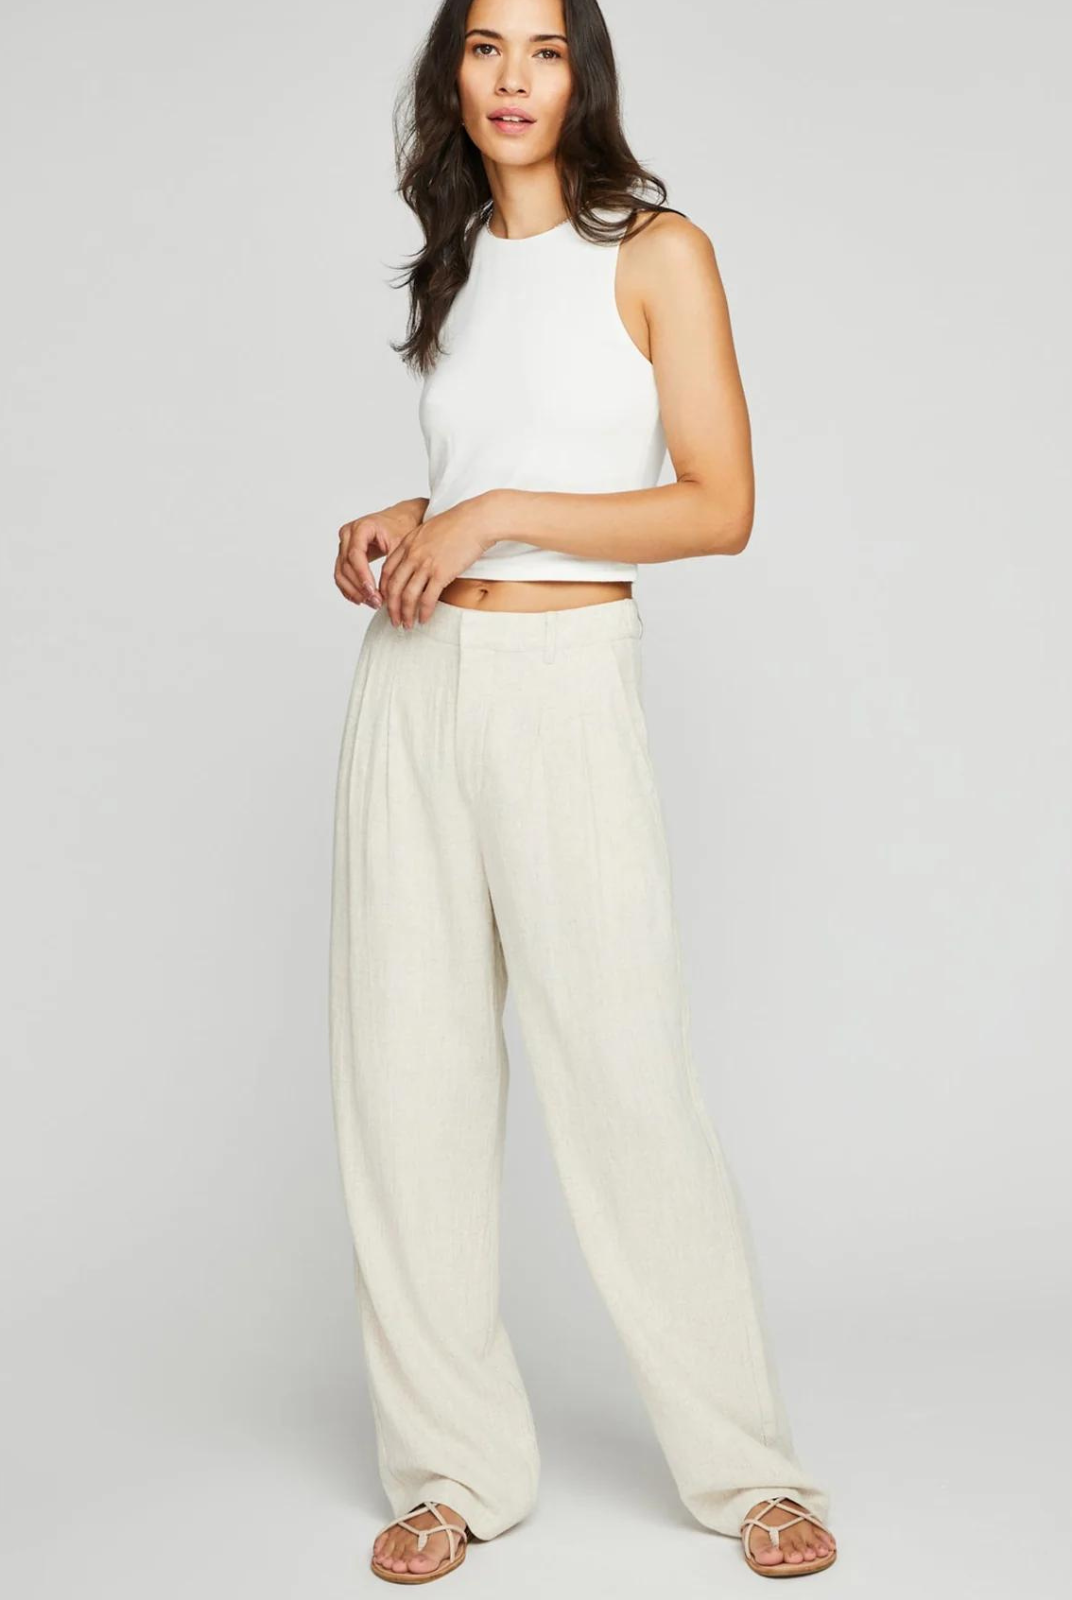 The Elliot is a classic trouser silhouette reimagined in a linen blend for an effortless look and feel. Features include slash pockets, a front fly zipper and back elastic for ease of wear. Complete the look with the Millie tank, Leo tank, or Portia button-down.